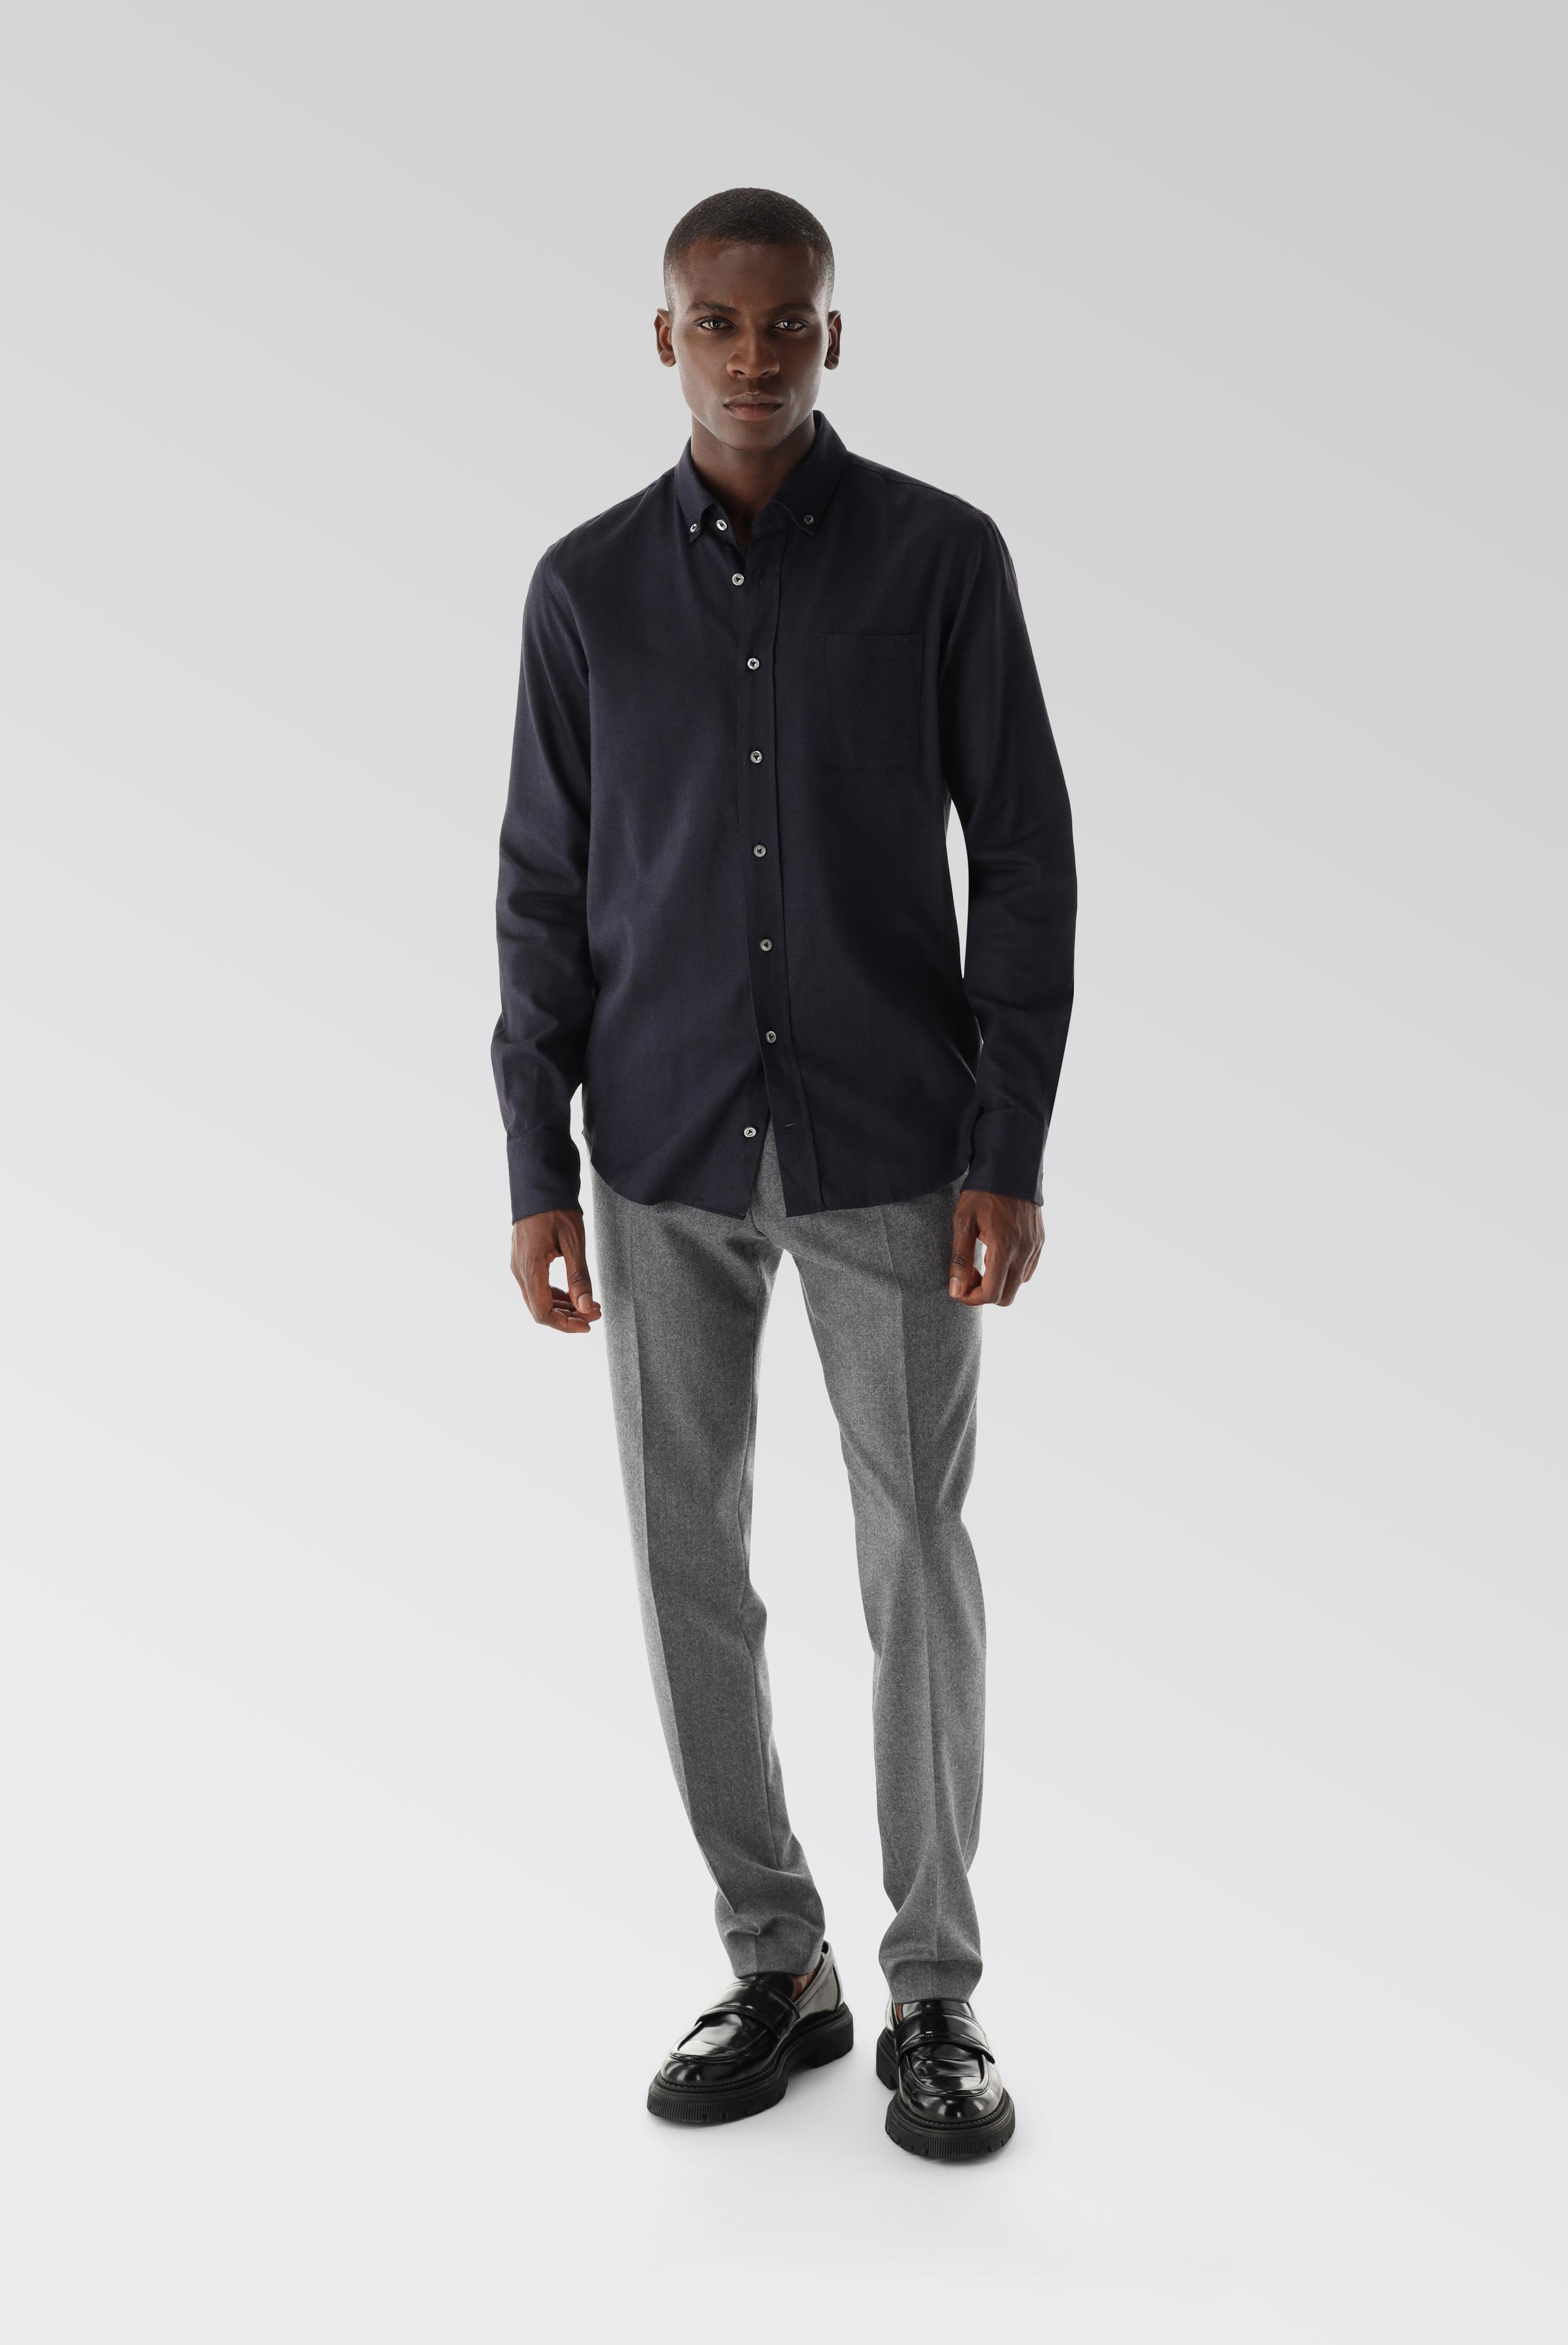 Casual Hemden+Button-Down Flanellhemd Tailor Fit+20.2013.9V.155045.790.39